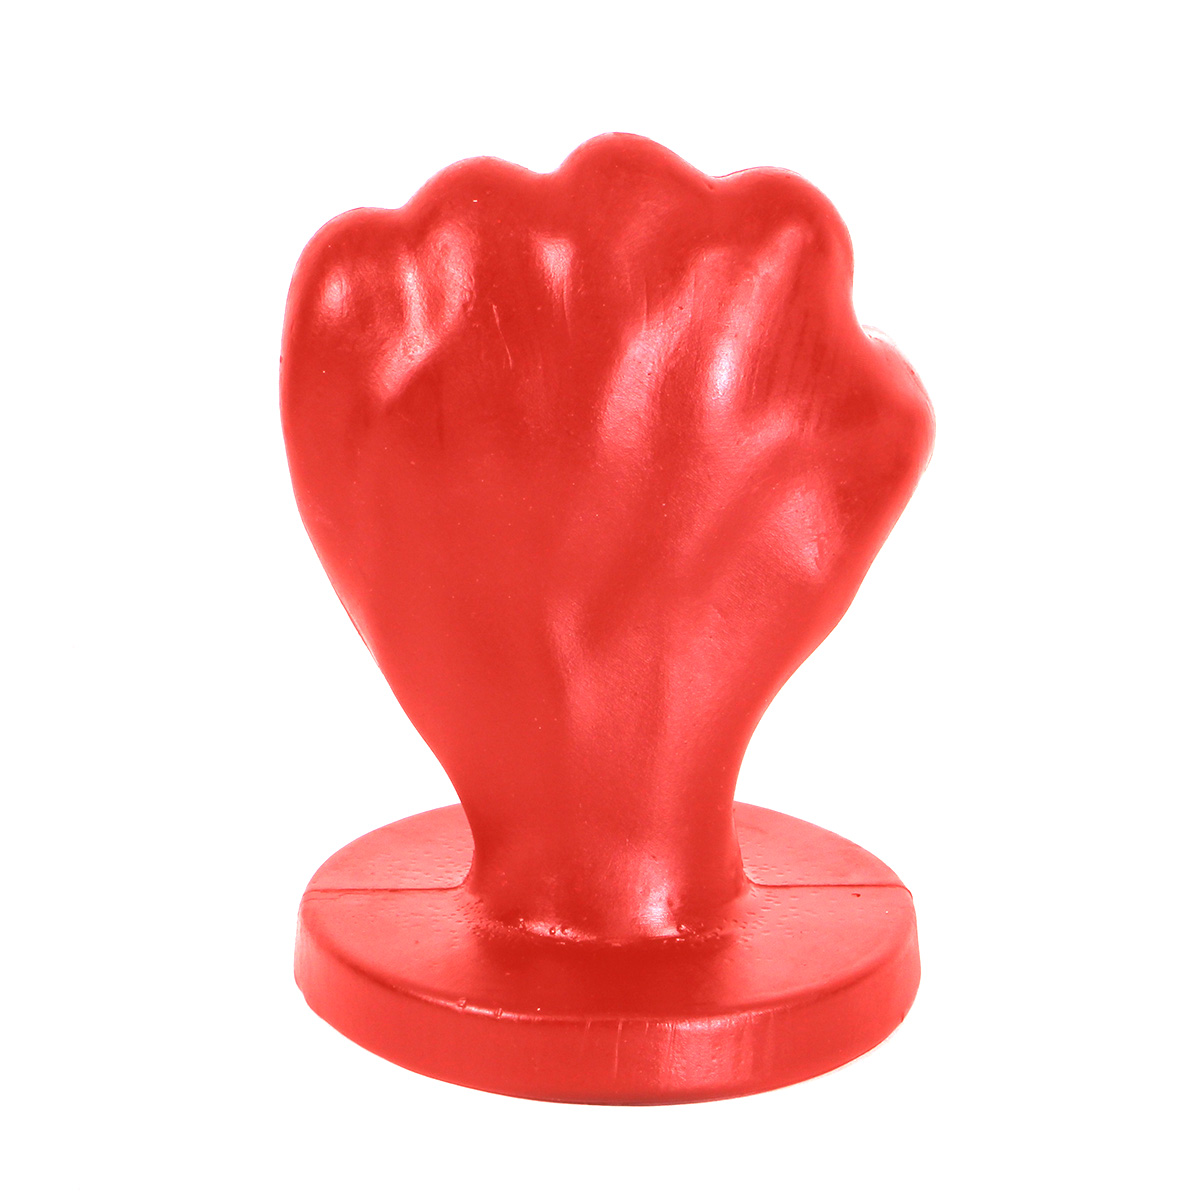 All-Red-Fist-Large-ABR94-115-ABR94-2